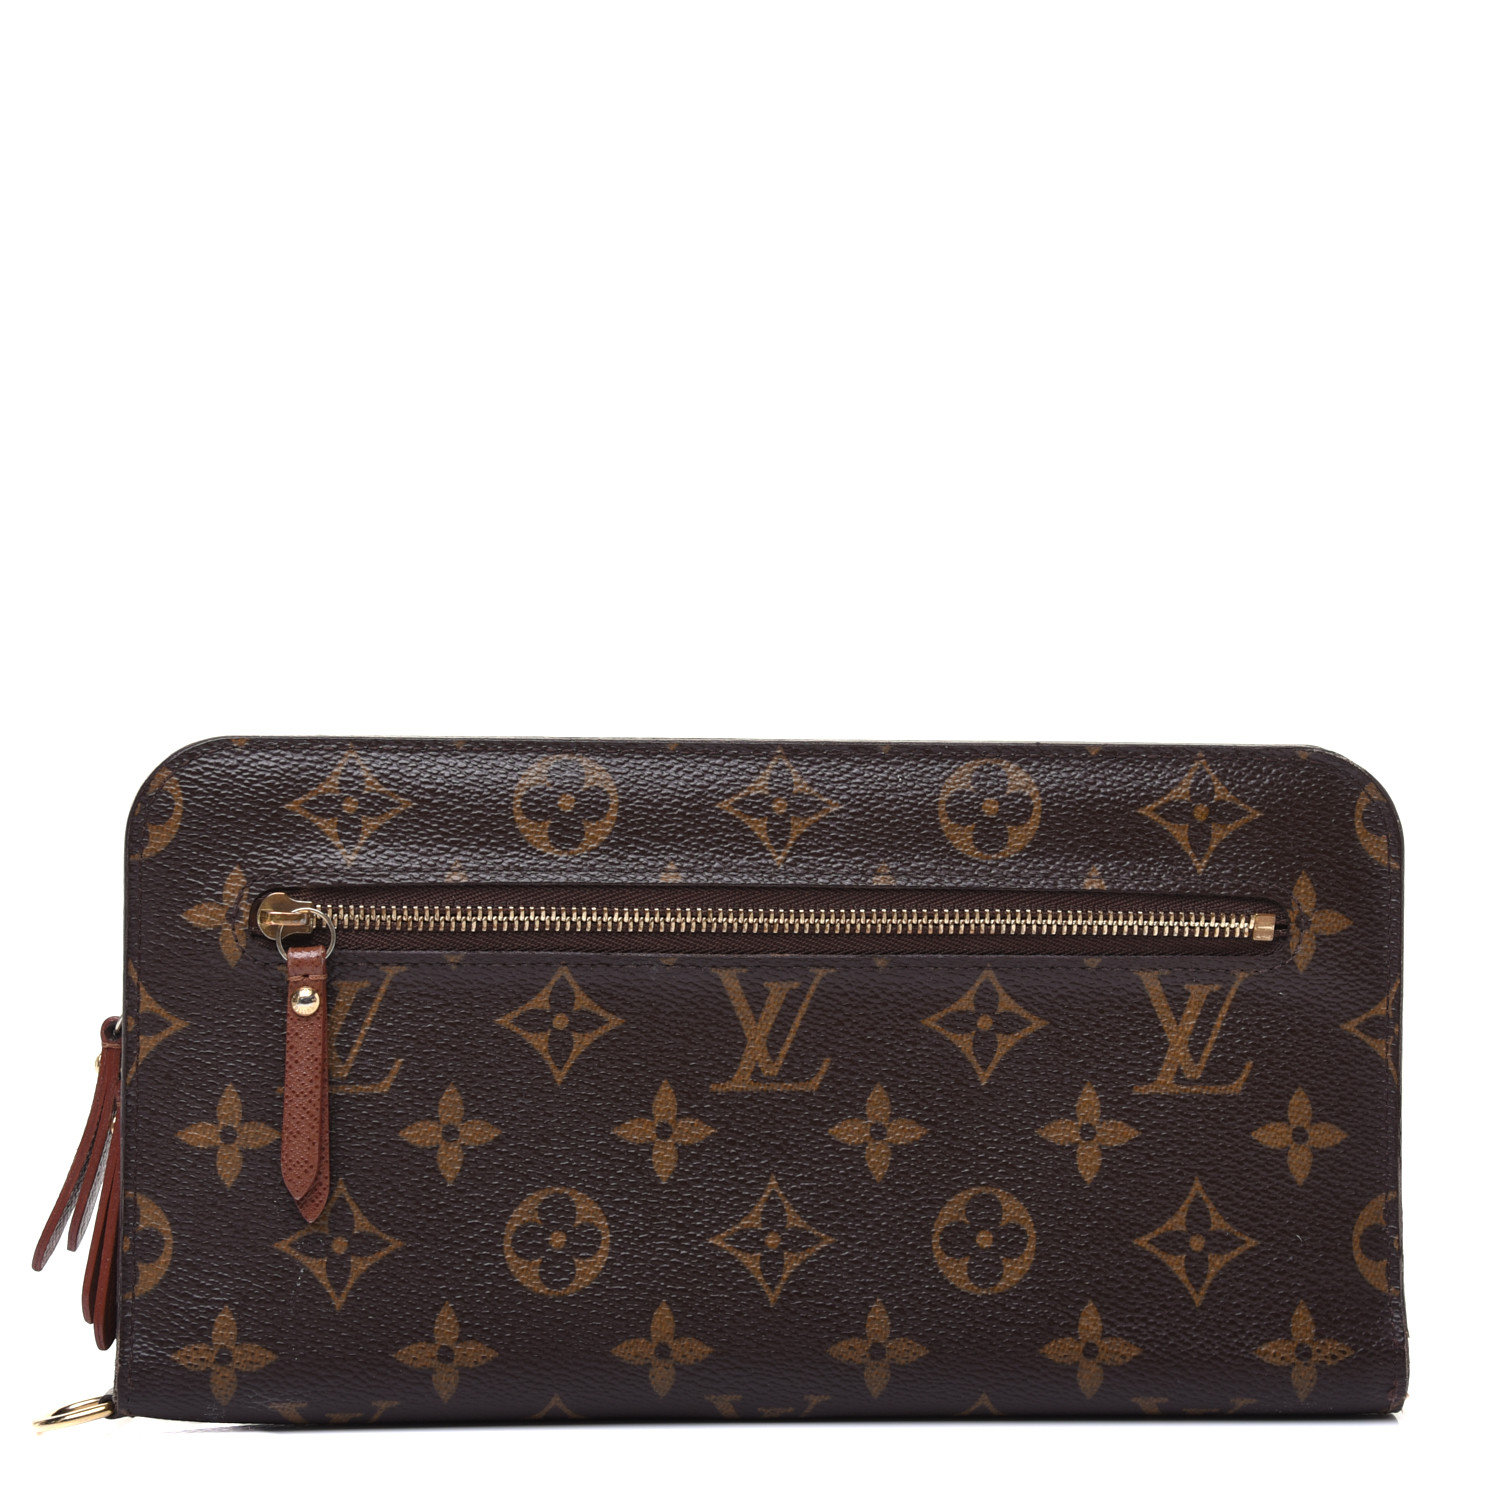 Louis Vuitton Organizer Insolite: Pictures + Review - Carly Cristman